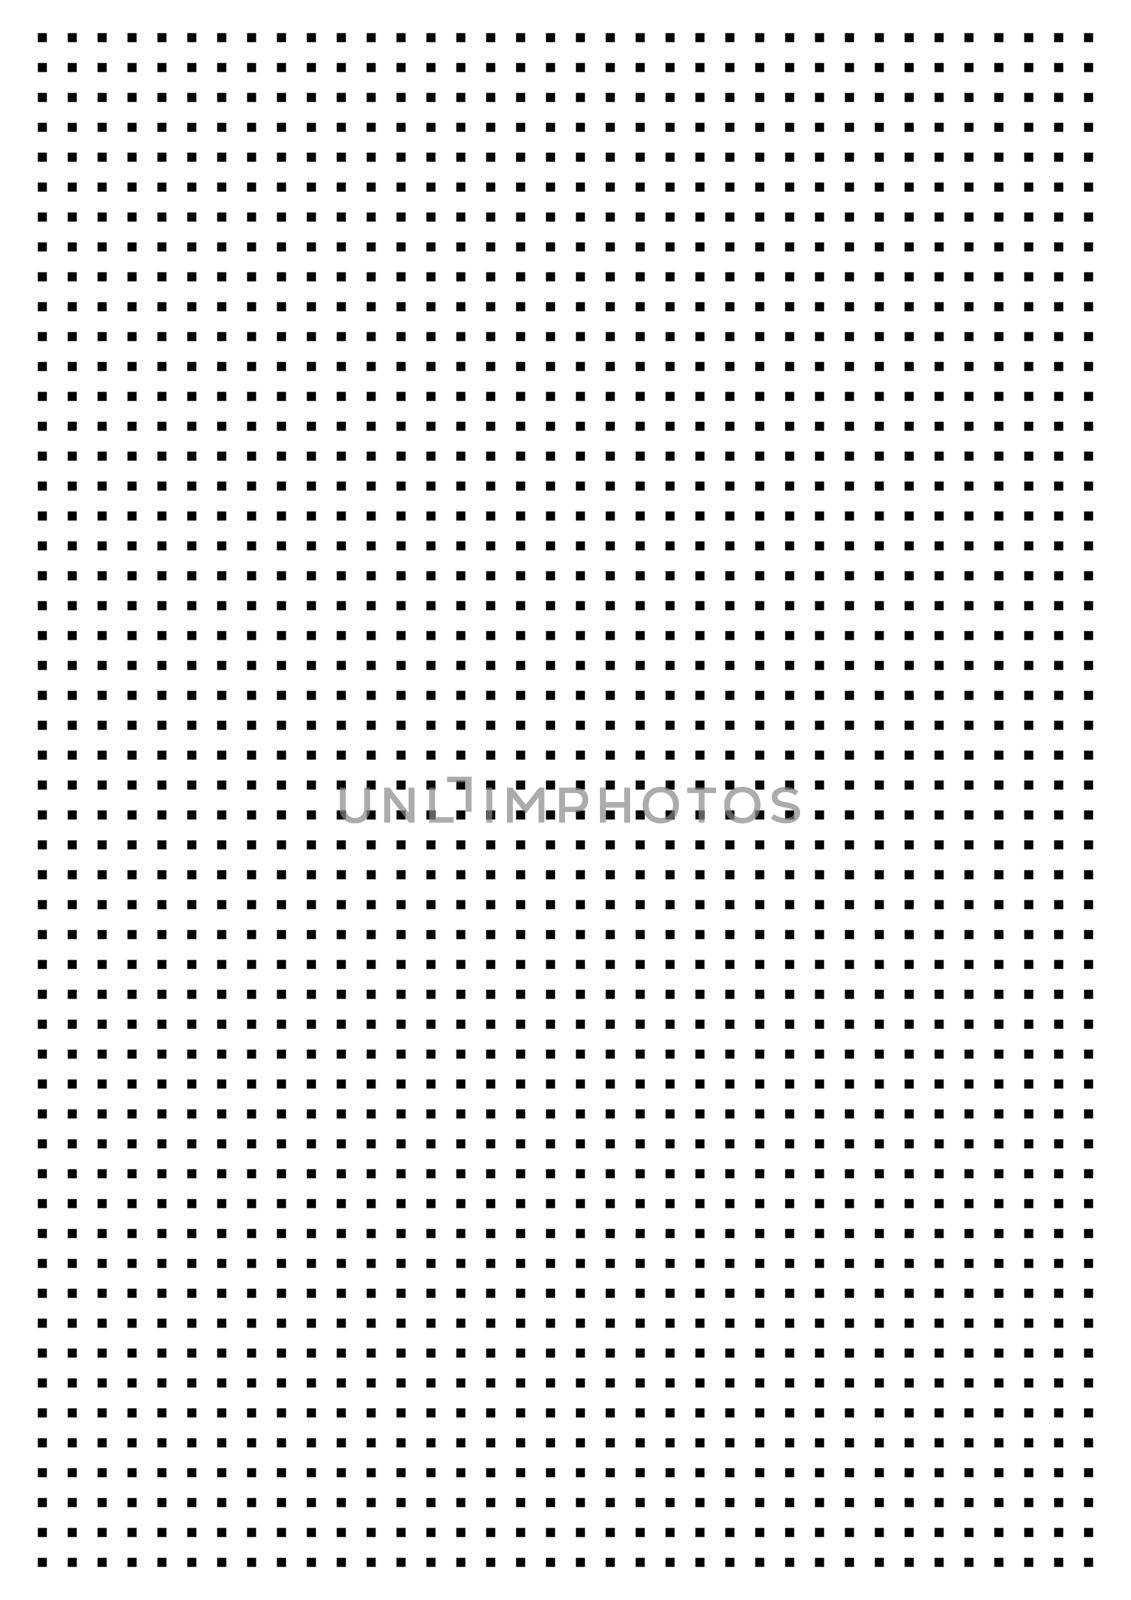 Grid paper. Dotted grid on white background. Abstract dotted transparent illustration with dots. White geometric pattern for school, copybooks, notebooks, diary, notes, banners, print, books by allaku